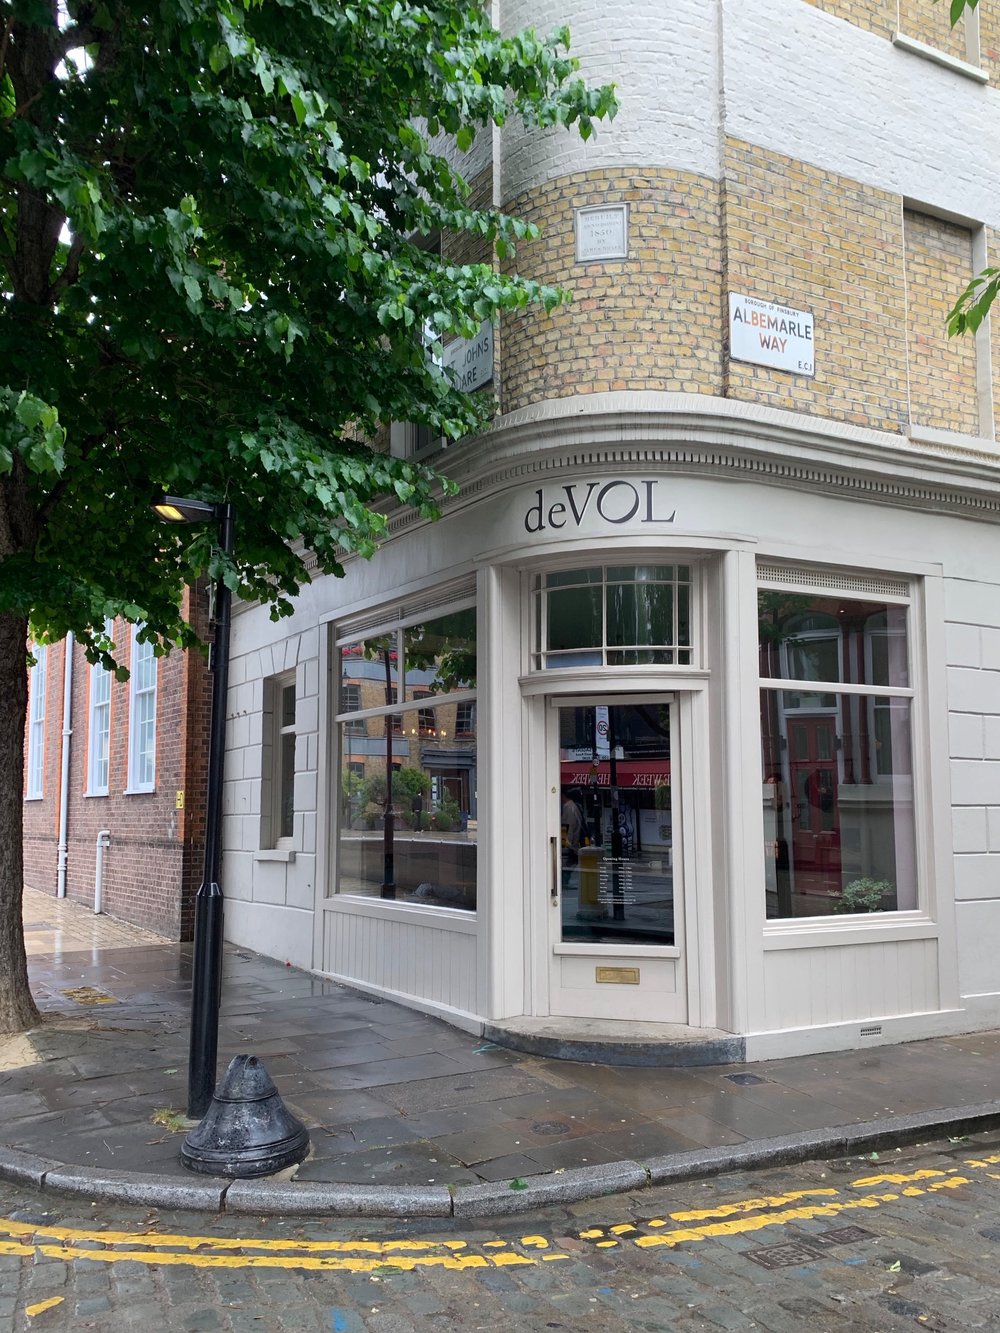  I’ve been following this British kitchen design company for awhile now, so of course we had to make a pilgrimage.  This particular store was located in the Clerkenwell neighborhood in London.  Just lovely.  I’m really becoming a interior design nerd